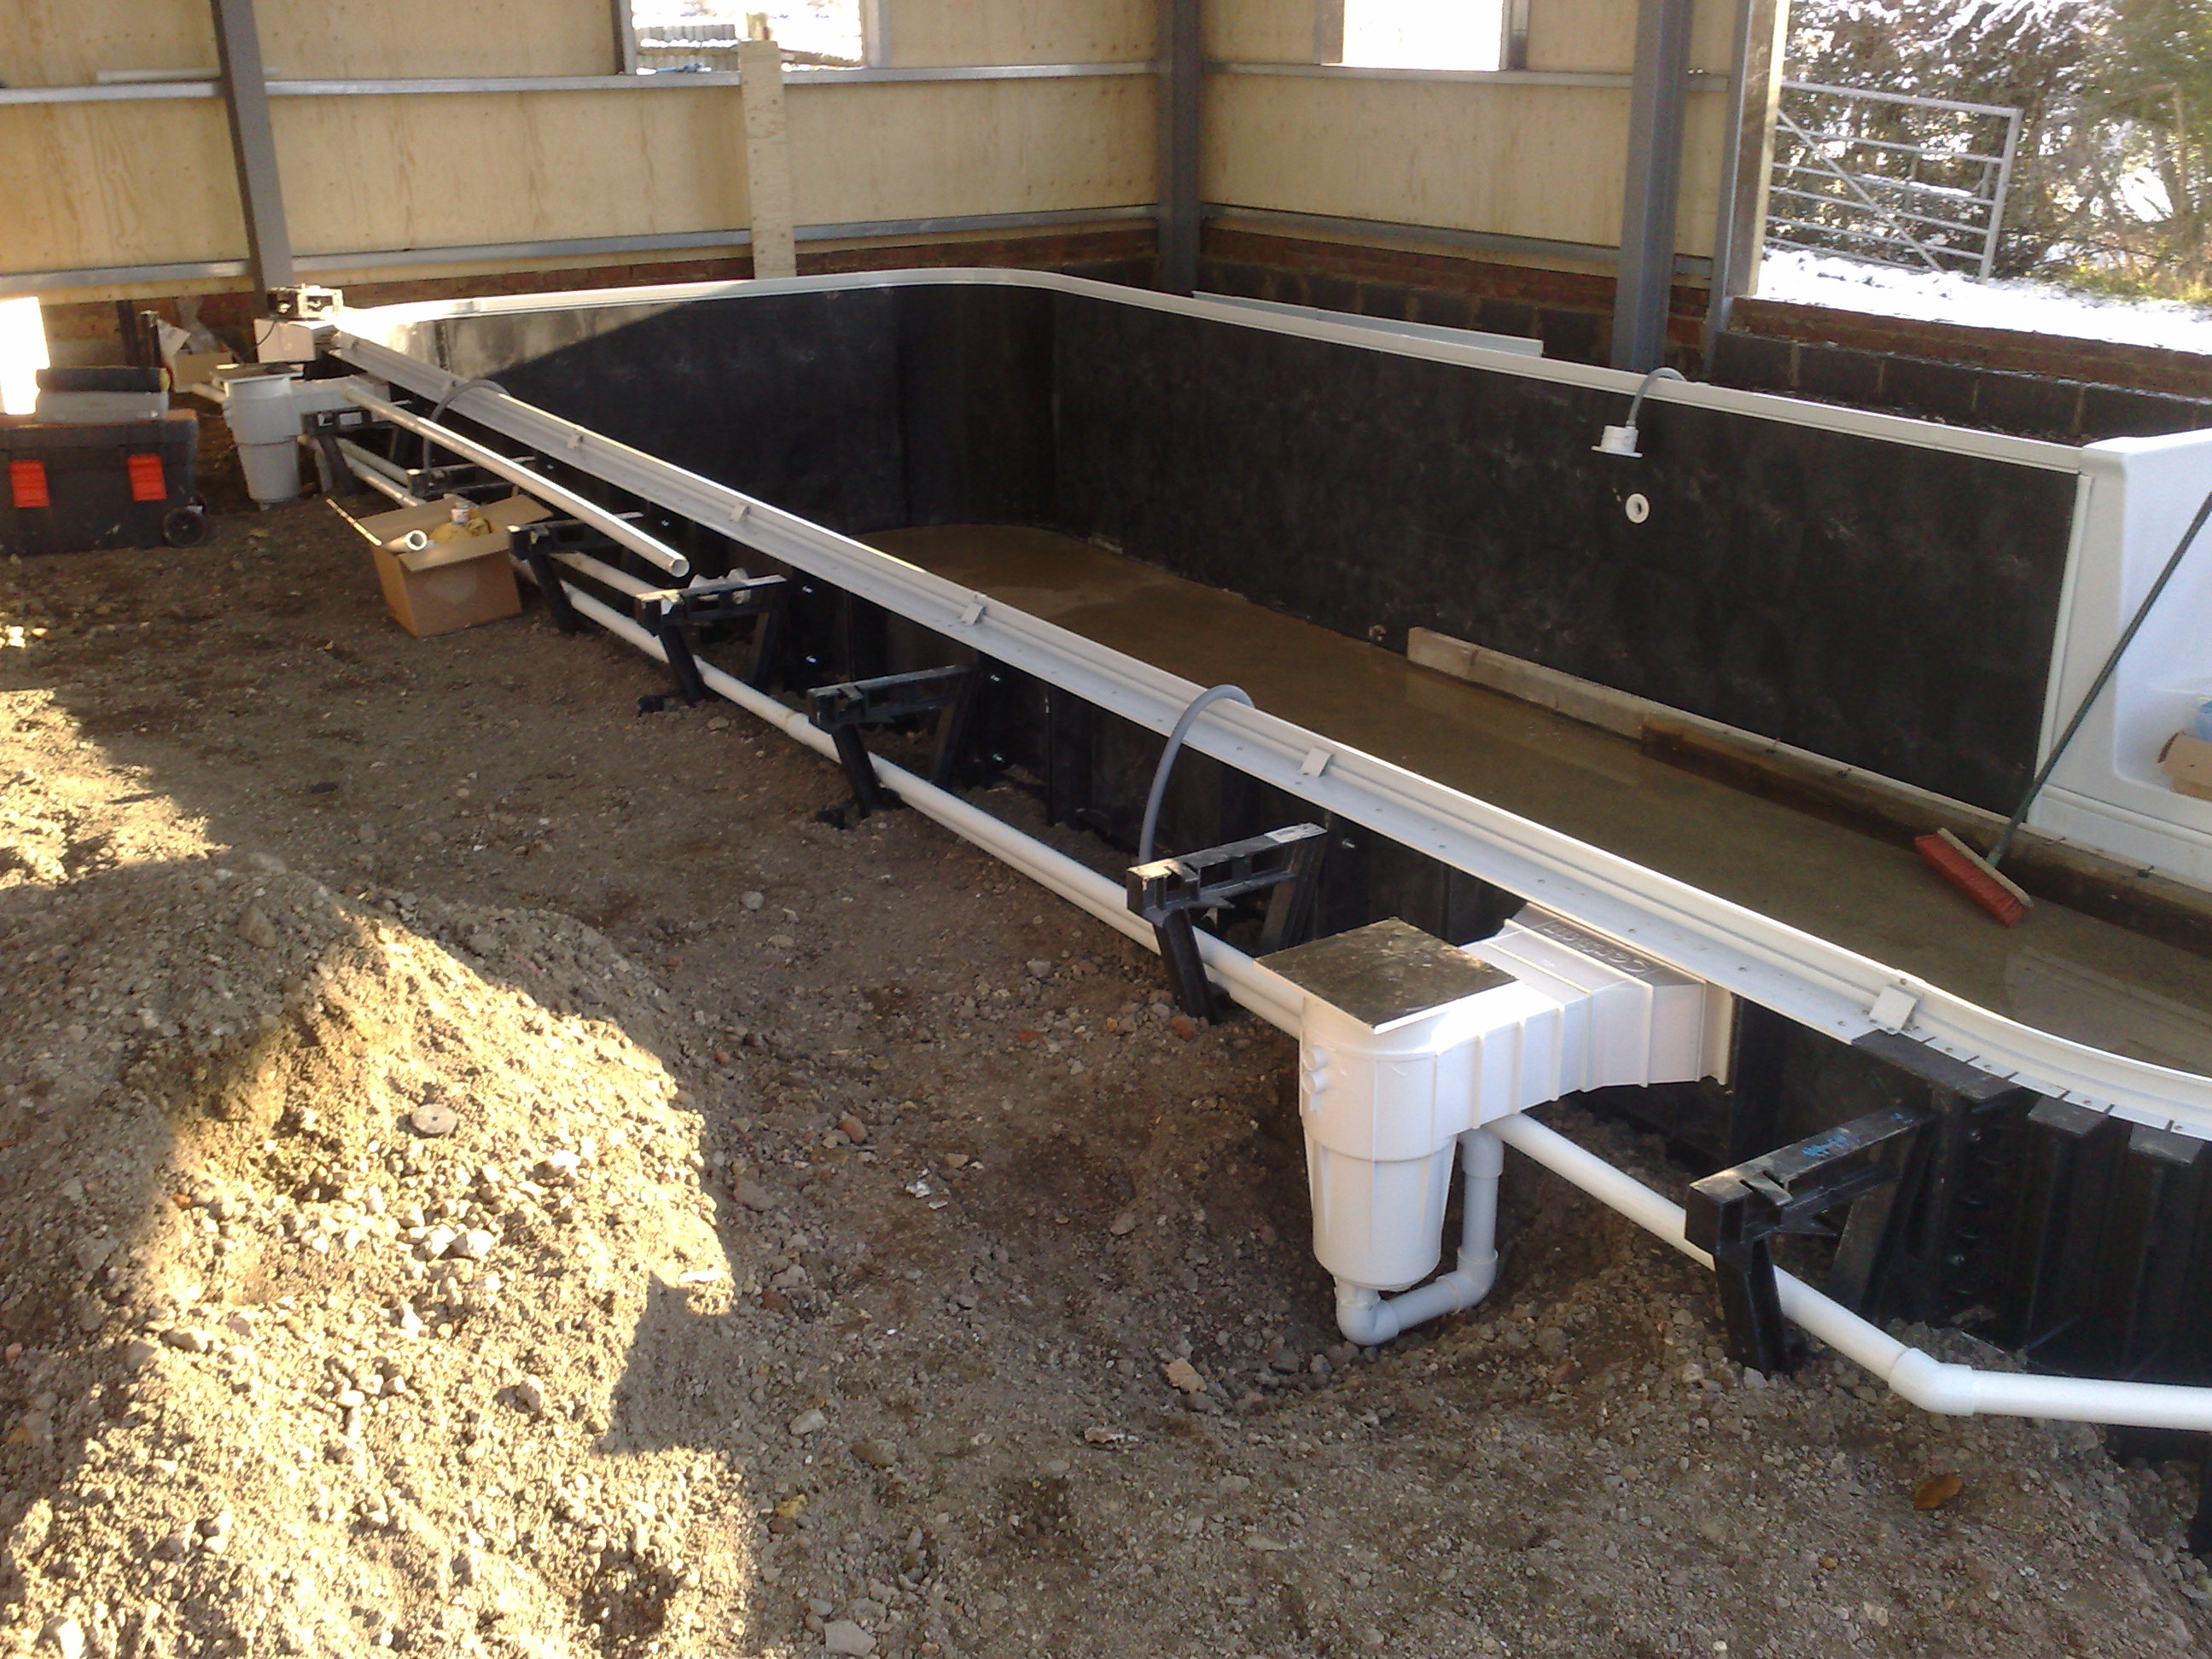 Kafko Polymer Panel swimming pool under construction - skimmer and pipework